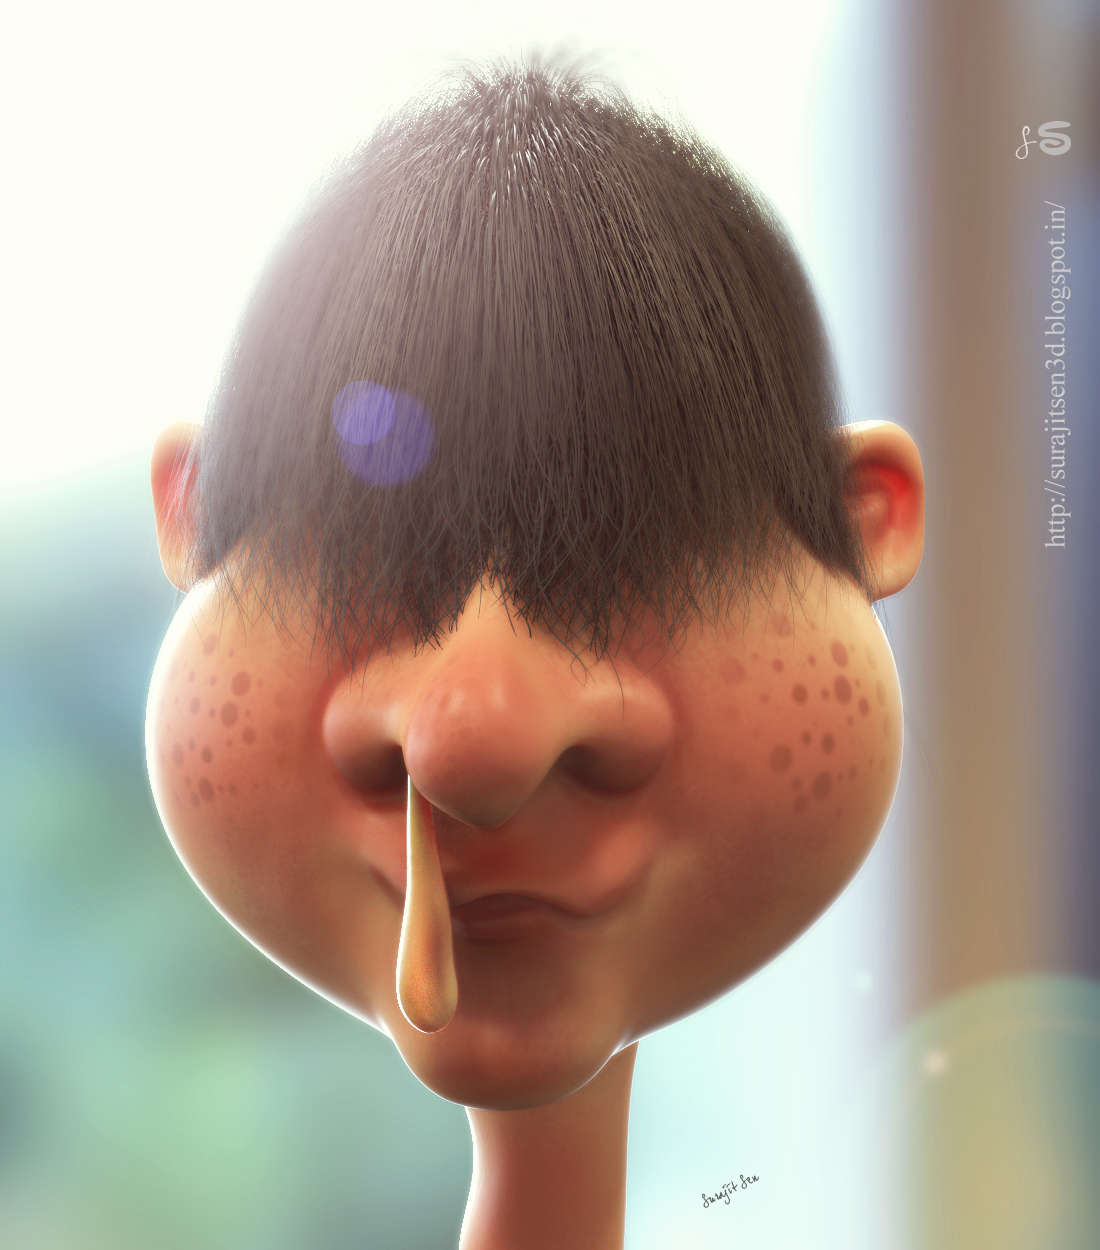 Coldie_funny_concept_character_by_SurajitSen.JPG